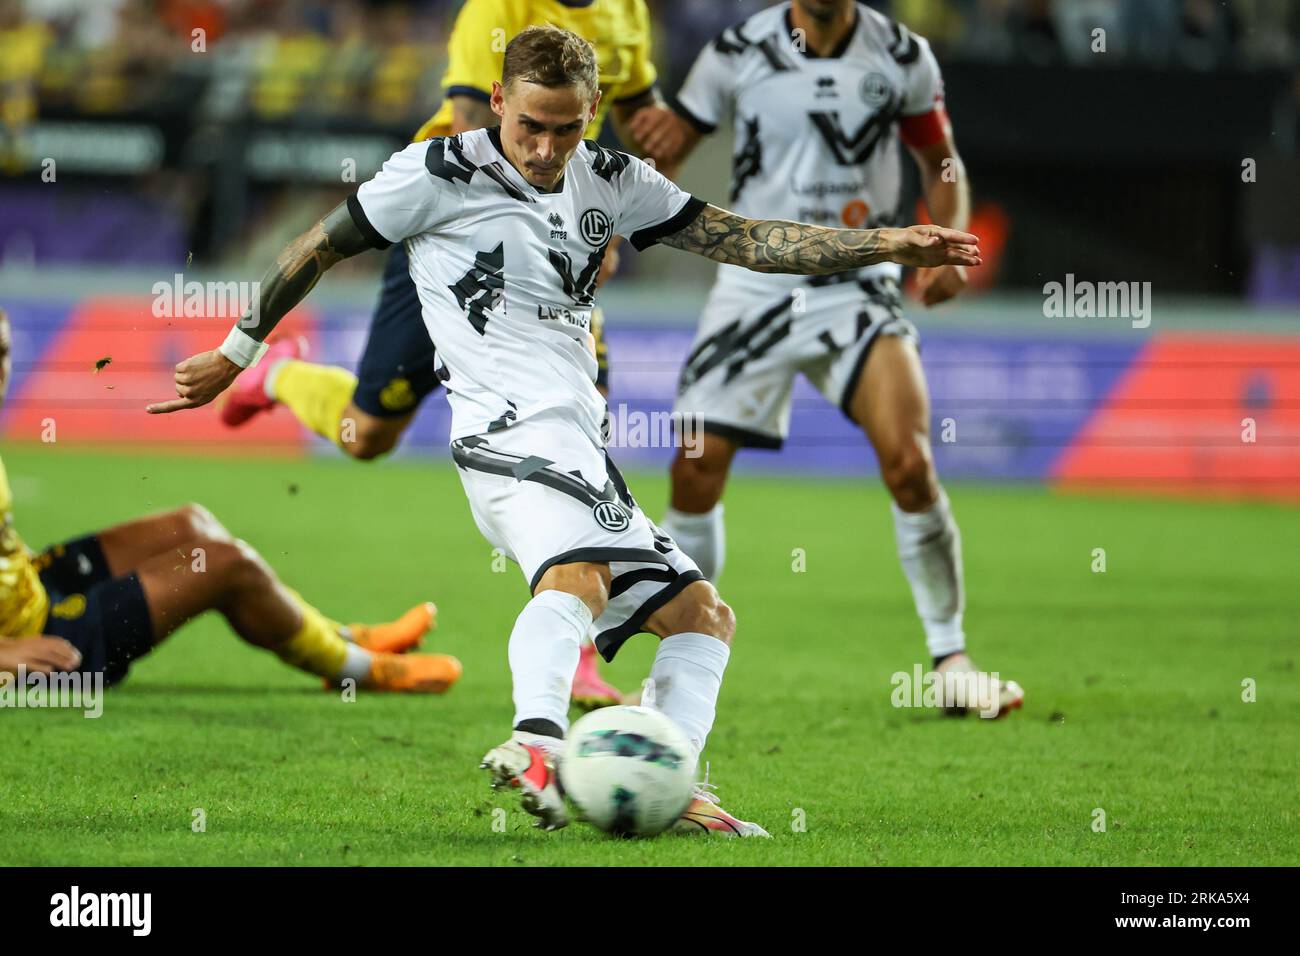 Brussels, Belgium. 24th Aug, 2023. Lugano's Allan Arigoni and Lugano's  Mattia Bottani pictured during a soccer game between Belgian Royale Union  Saint Gilloise and Swiss FC Lugano, Thursday 24 August 2023 in